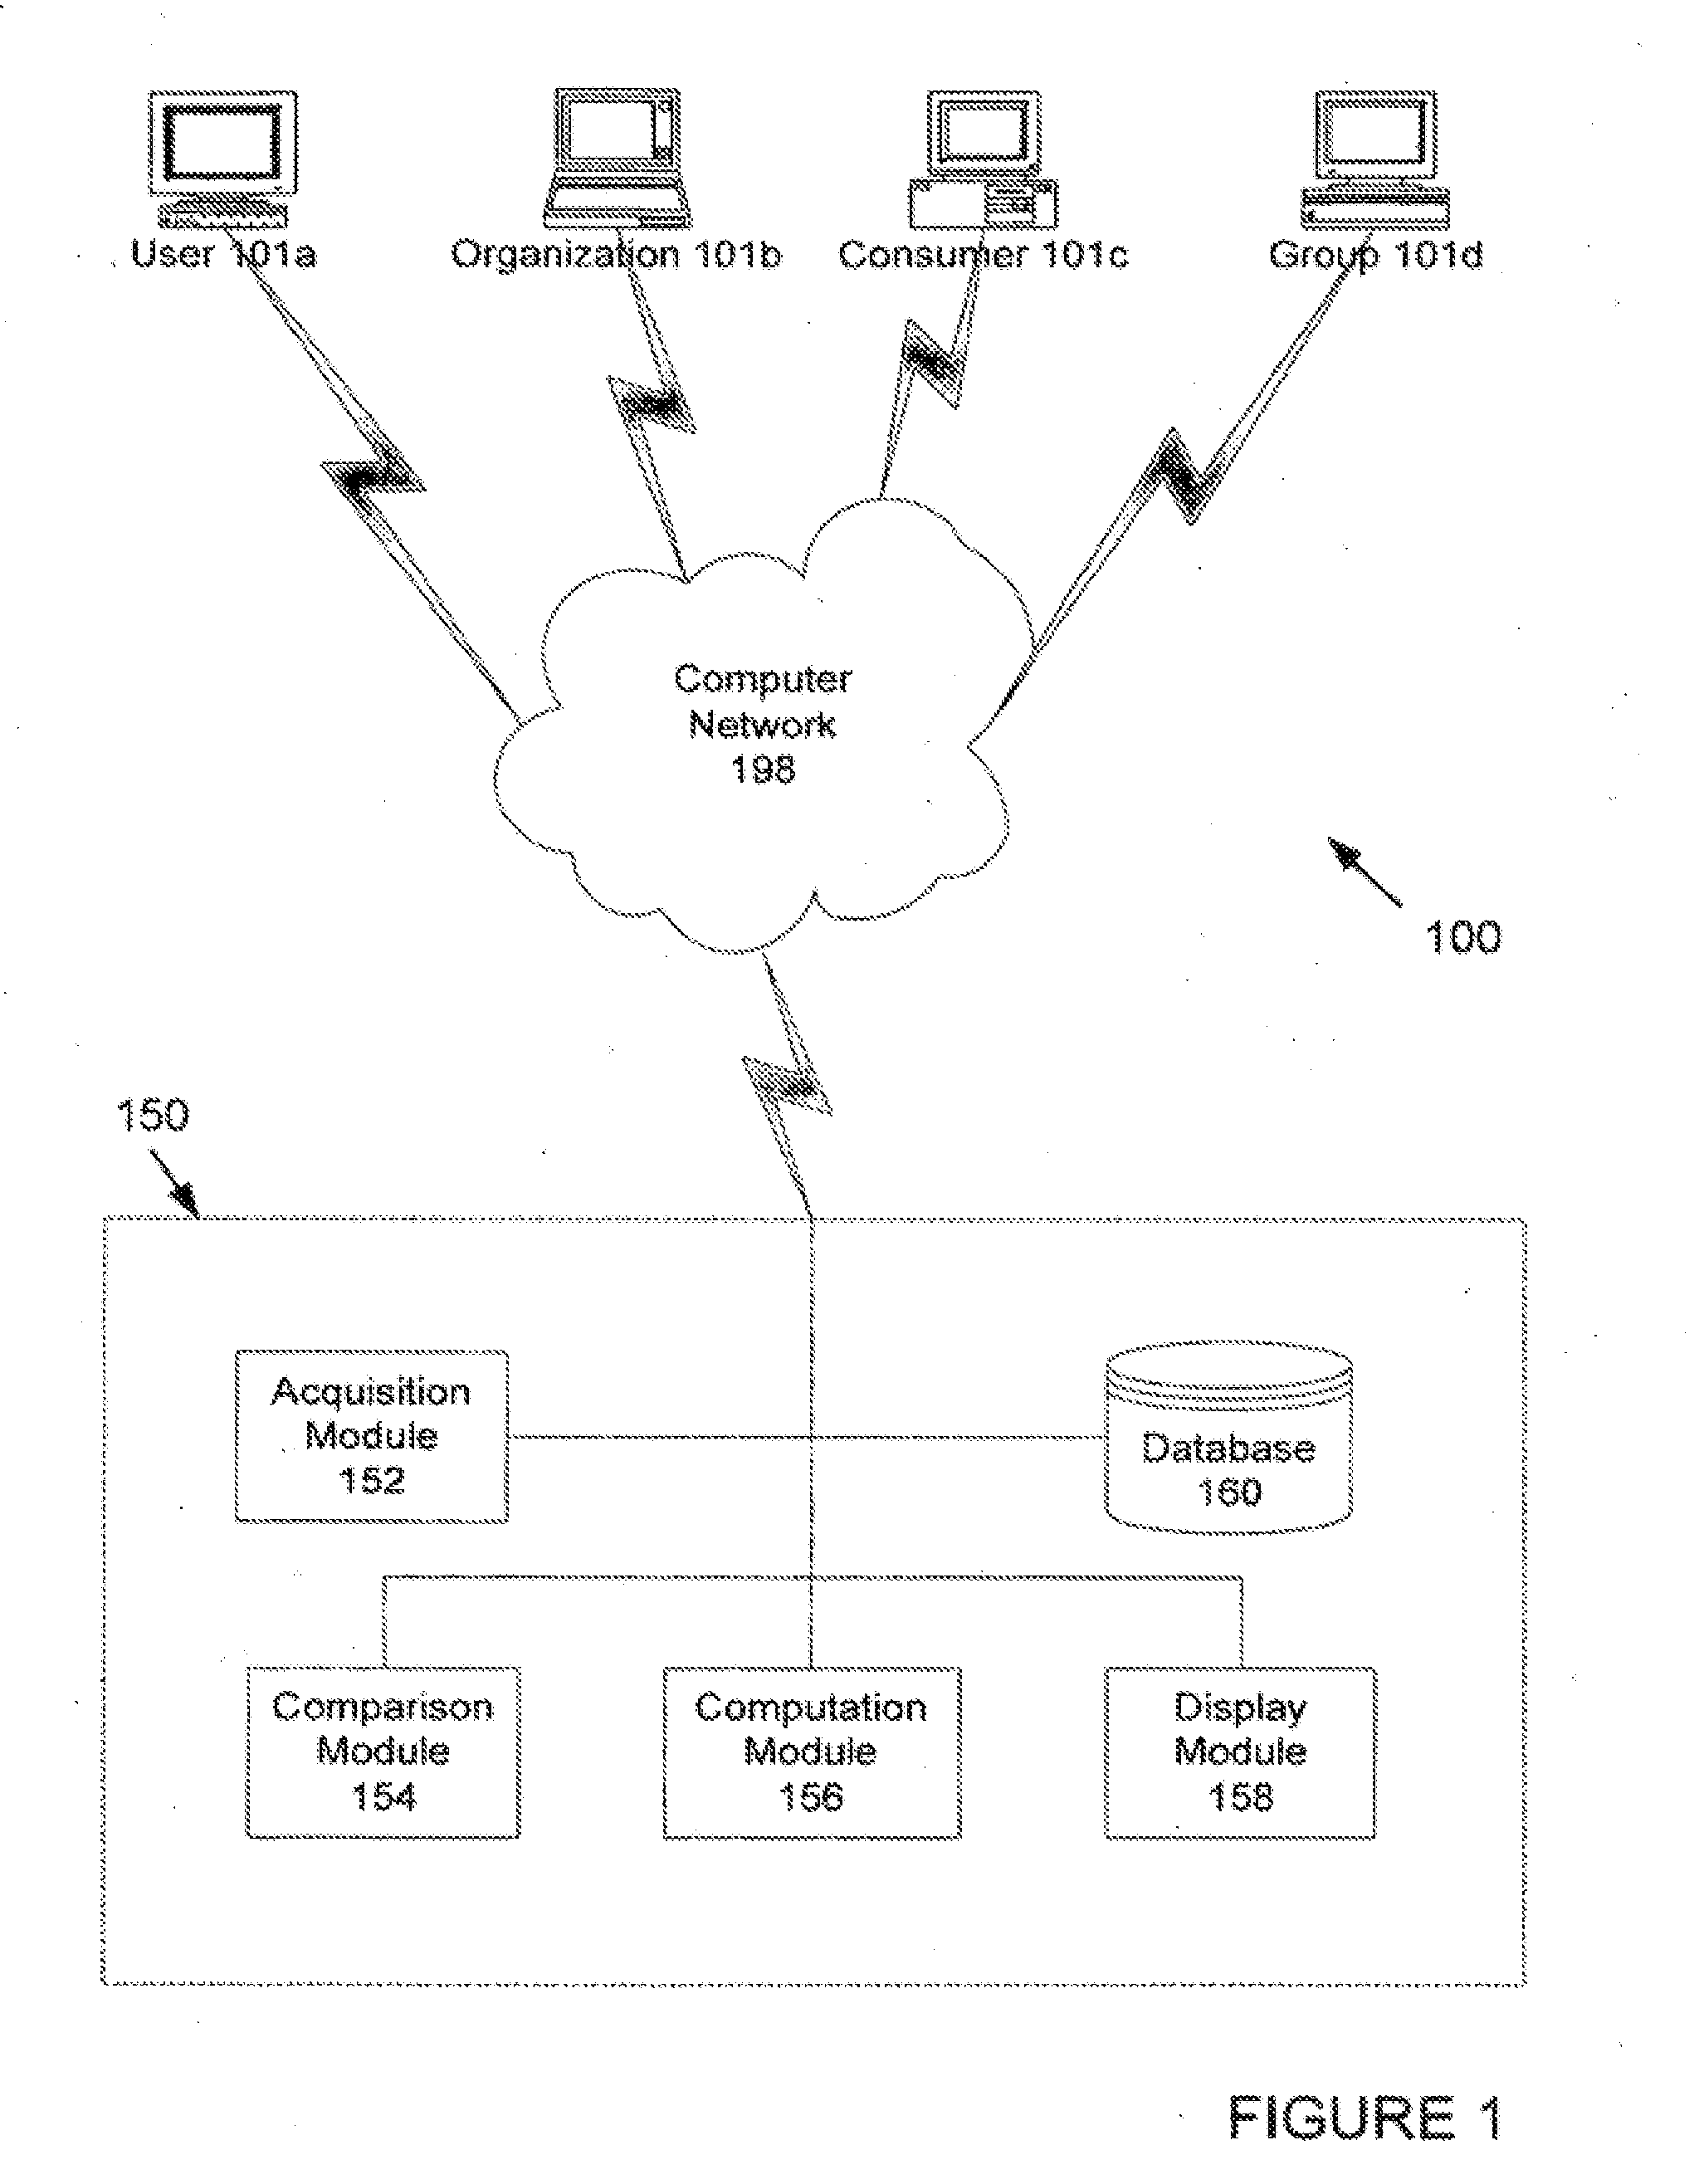 System and Method for an Electronic Product Advisor